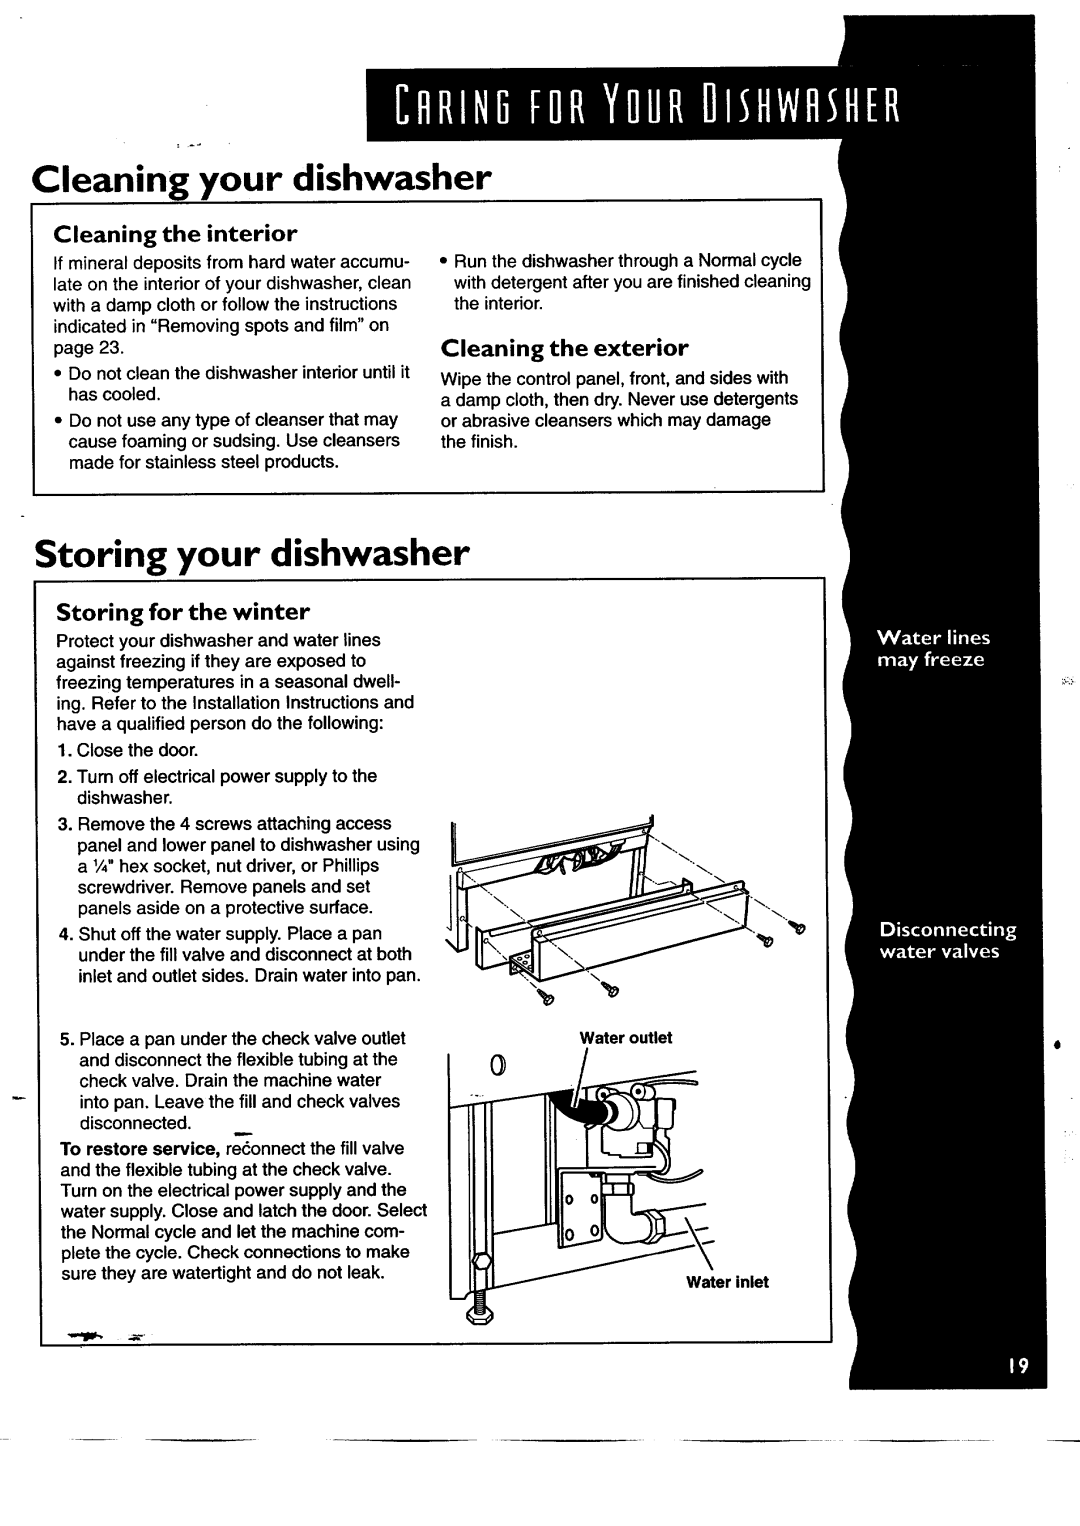 KitchenAid KUDH24SE manual Cleaning your dishwasher, Storing your dishwasher, Cleaning the interior, Cleaning the exterior 